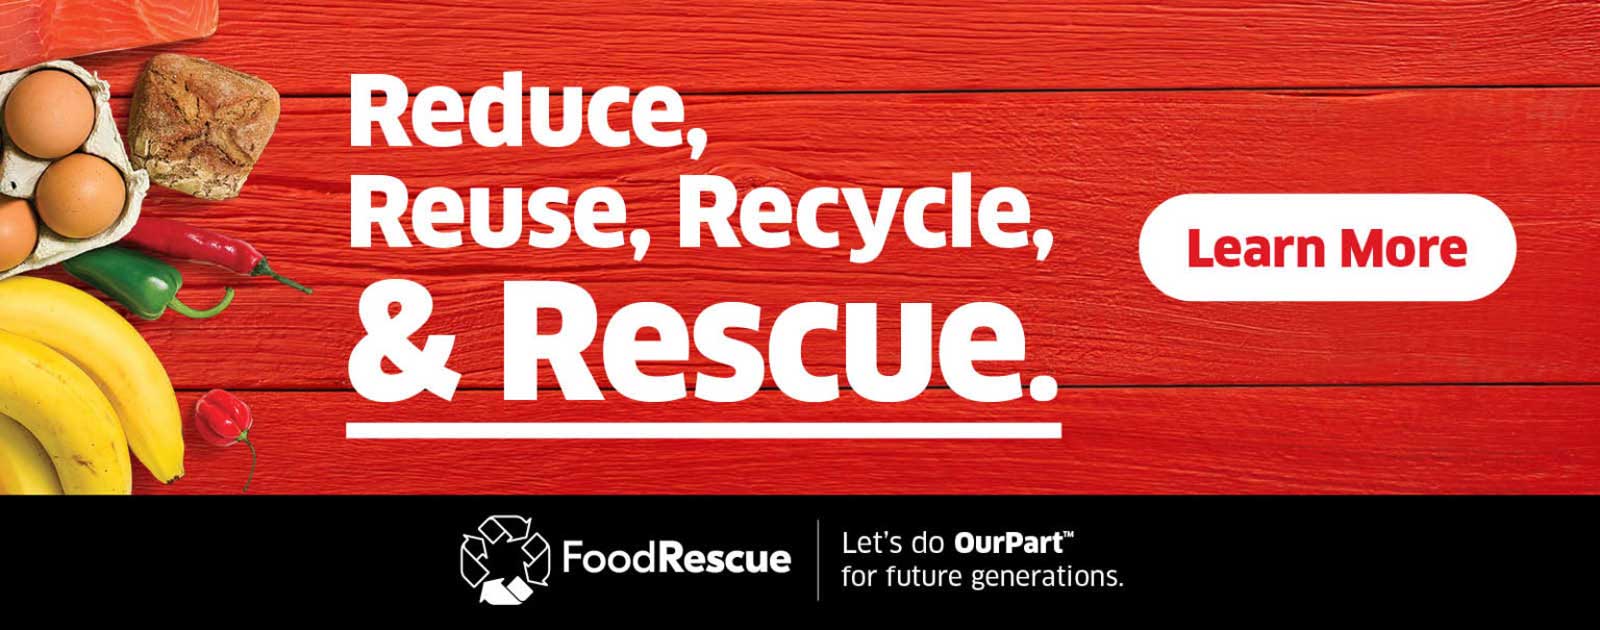 Text reading 'Let's do OUR PART for future generations. Know more about how to Reduce, Reuse, Recycle and Rescue from the 'Learn More' button given on the right side.'